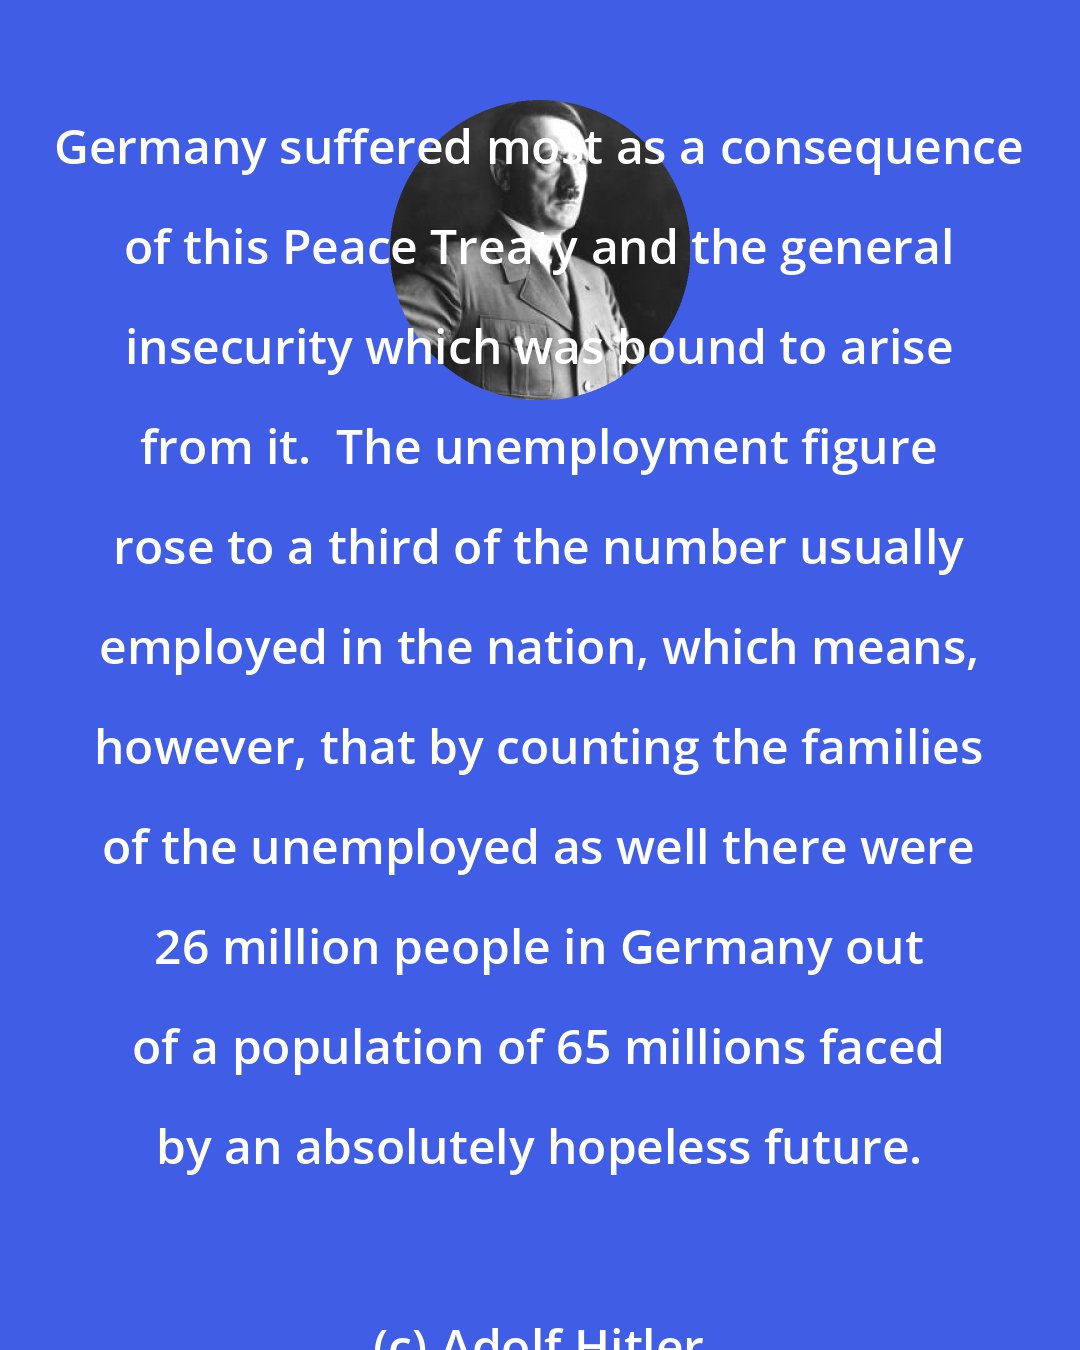 Adolf Hitler: Germany suffered most as a consequence of this Peace Treaty and the general insecurity which was bound to arise from it.  The unemployment figure rose to a third of the number usually employed in the nation, which means, however, that by counting the families of the unemployed as well there were 26 million people in Germany out of a population of 65 millions faced by an absolutely hopeless future.